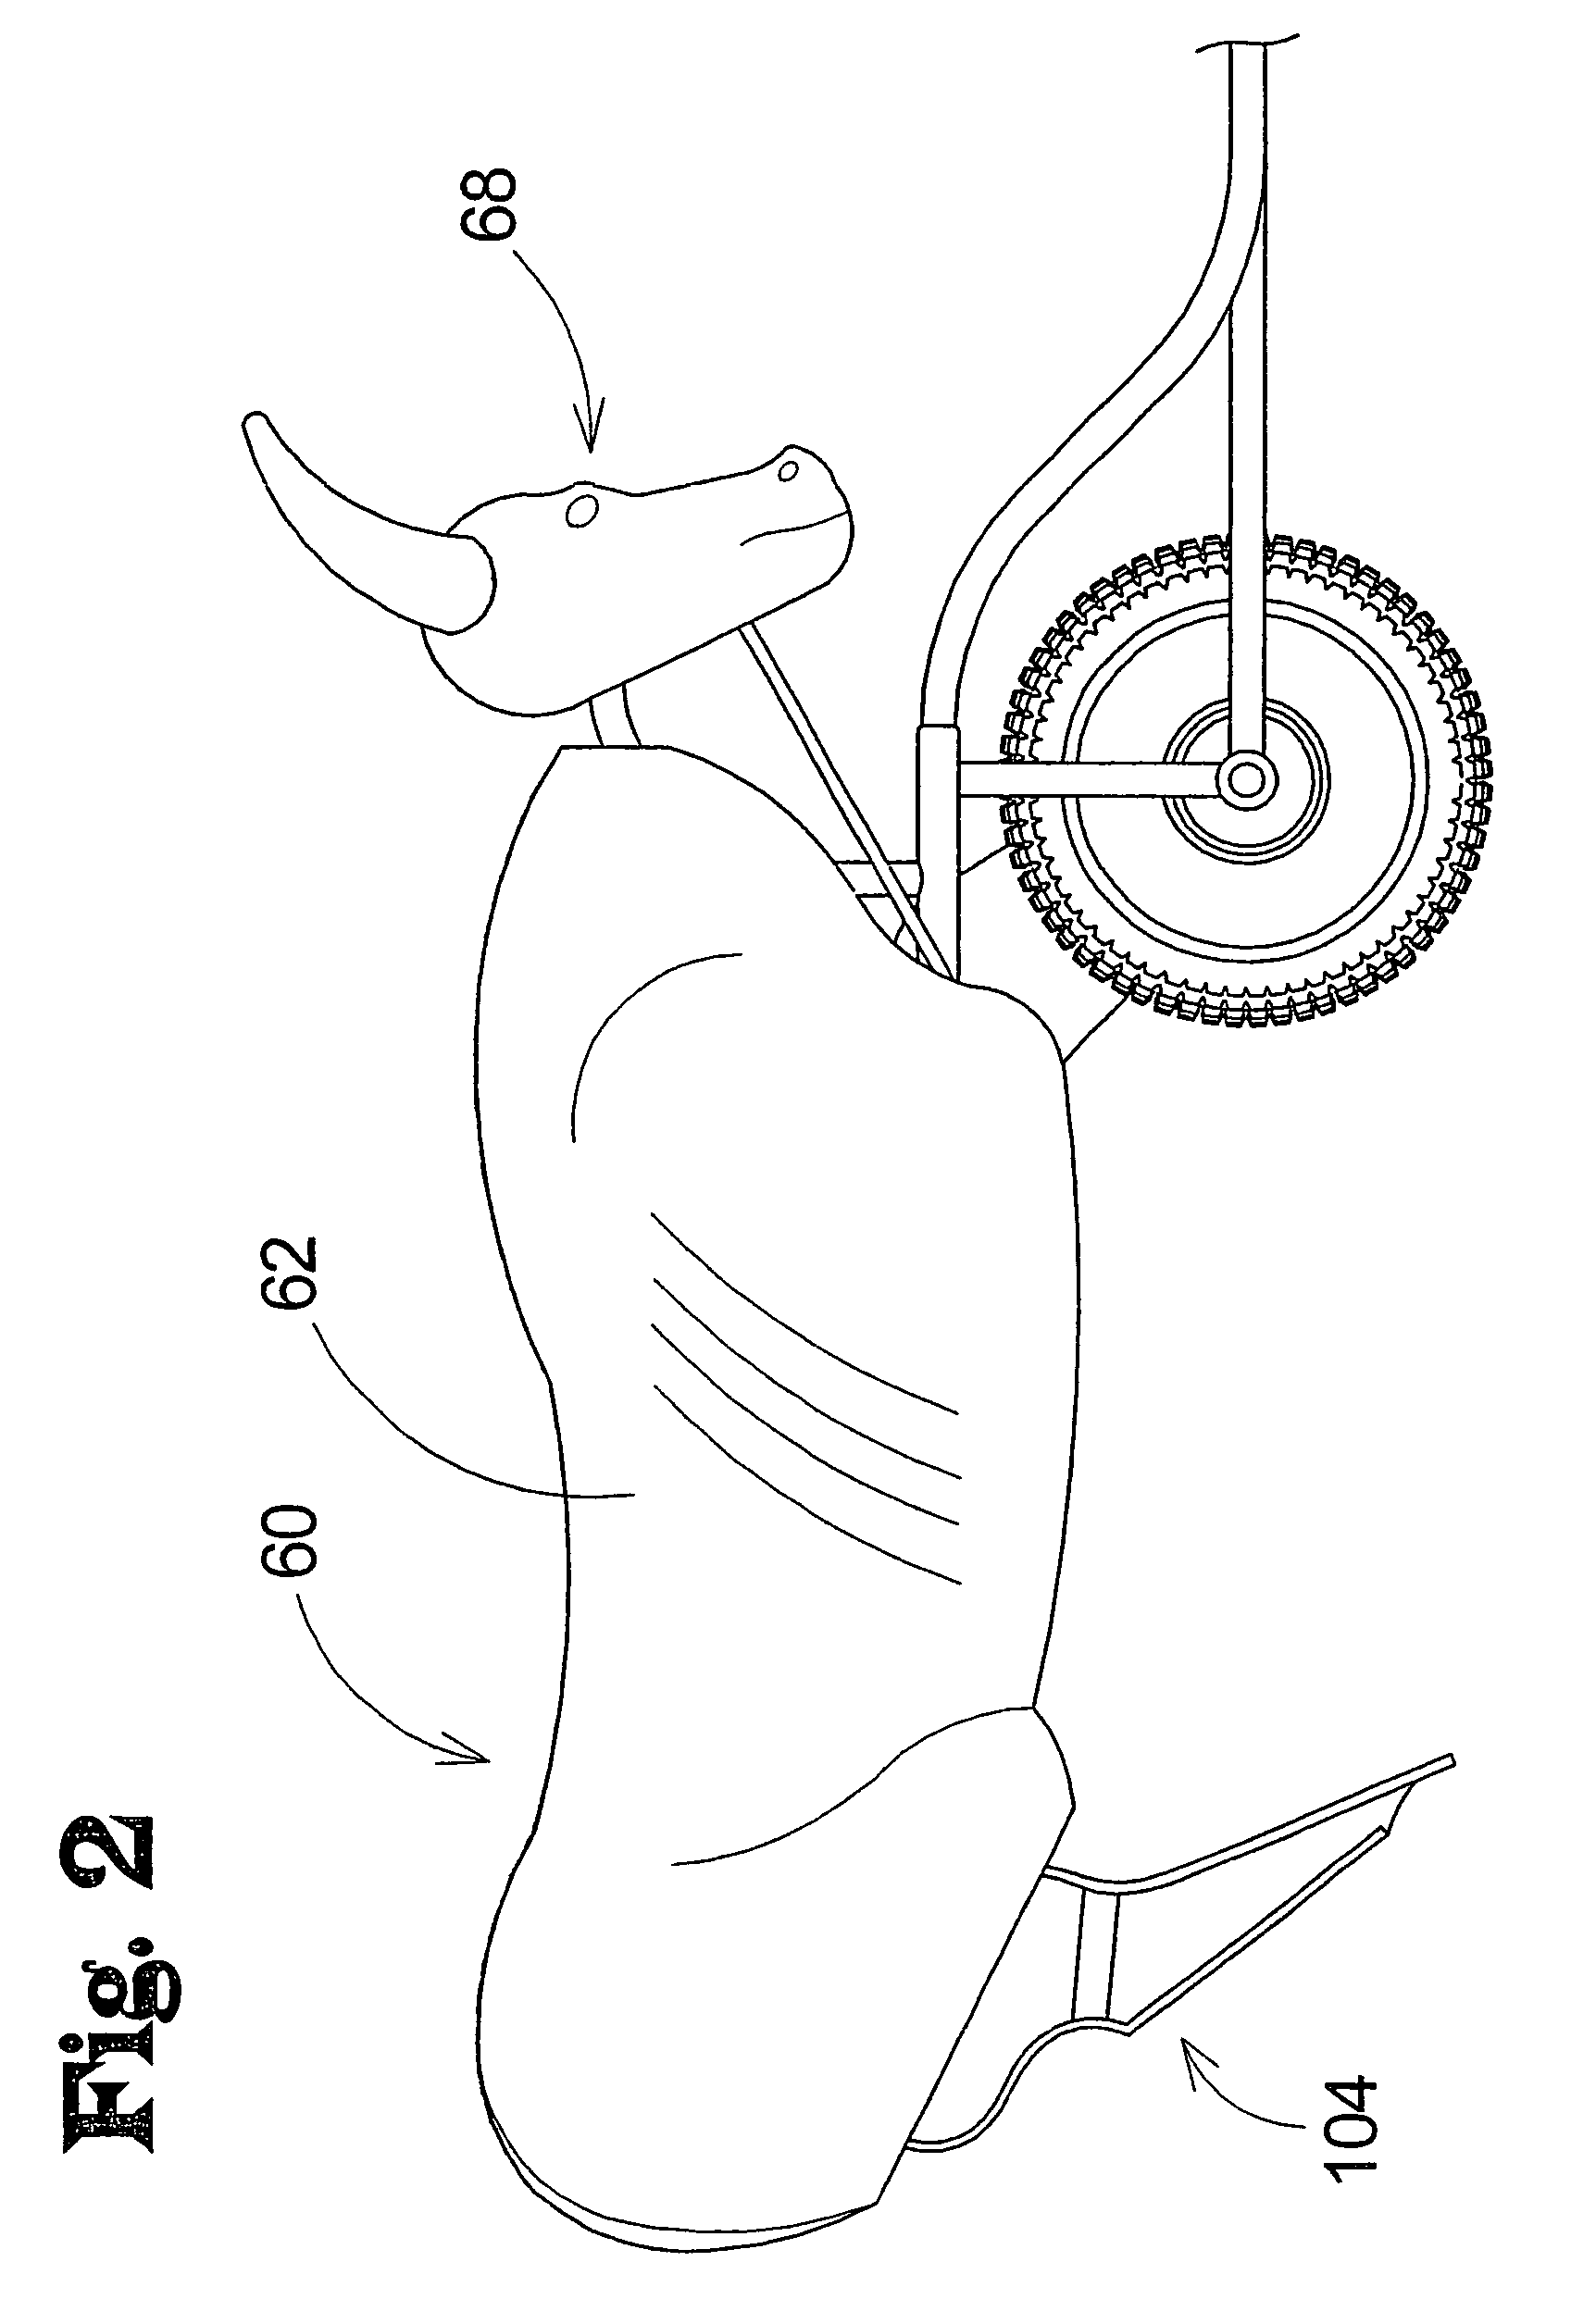 Mechanical roping steer apparatus with pivoting horns and pivoting horn support